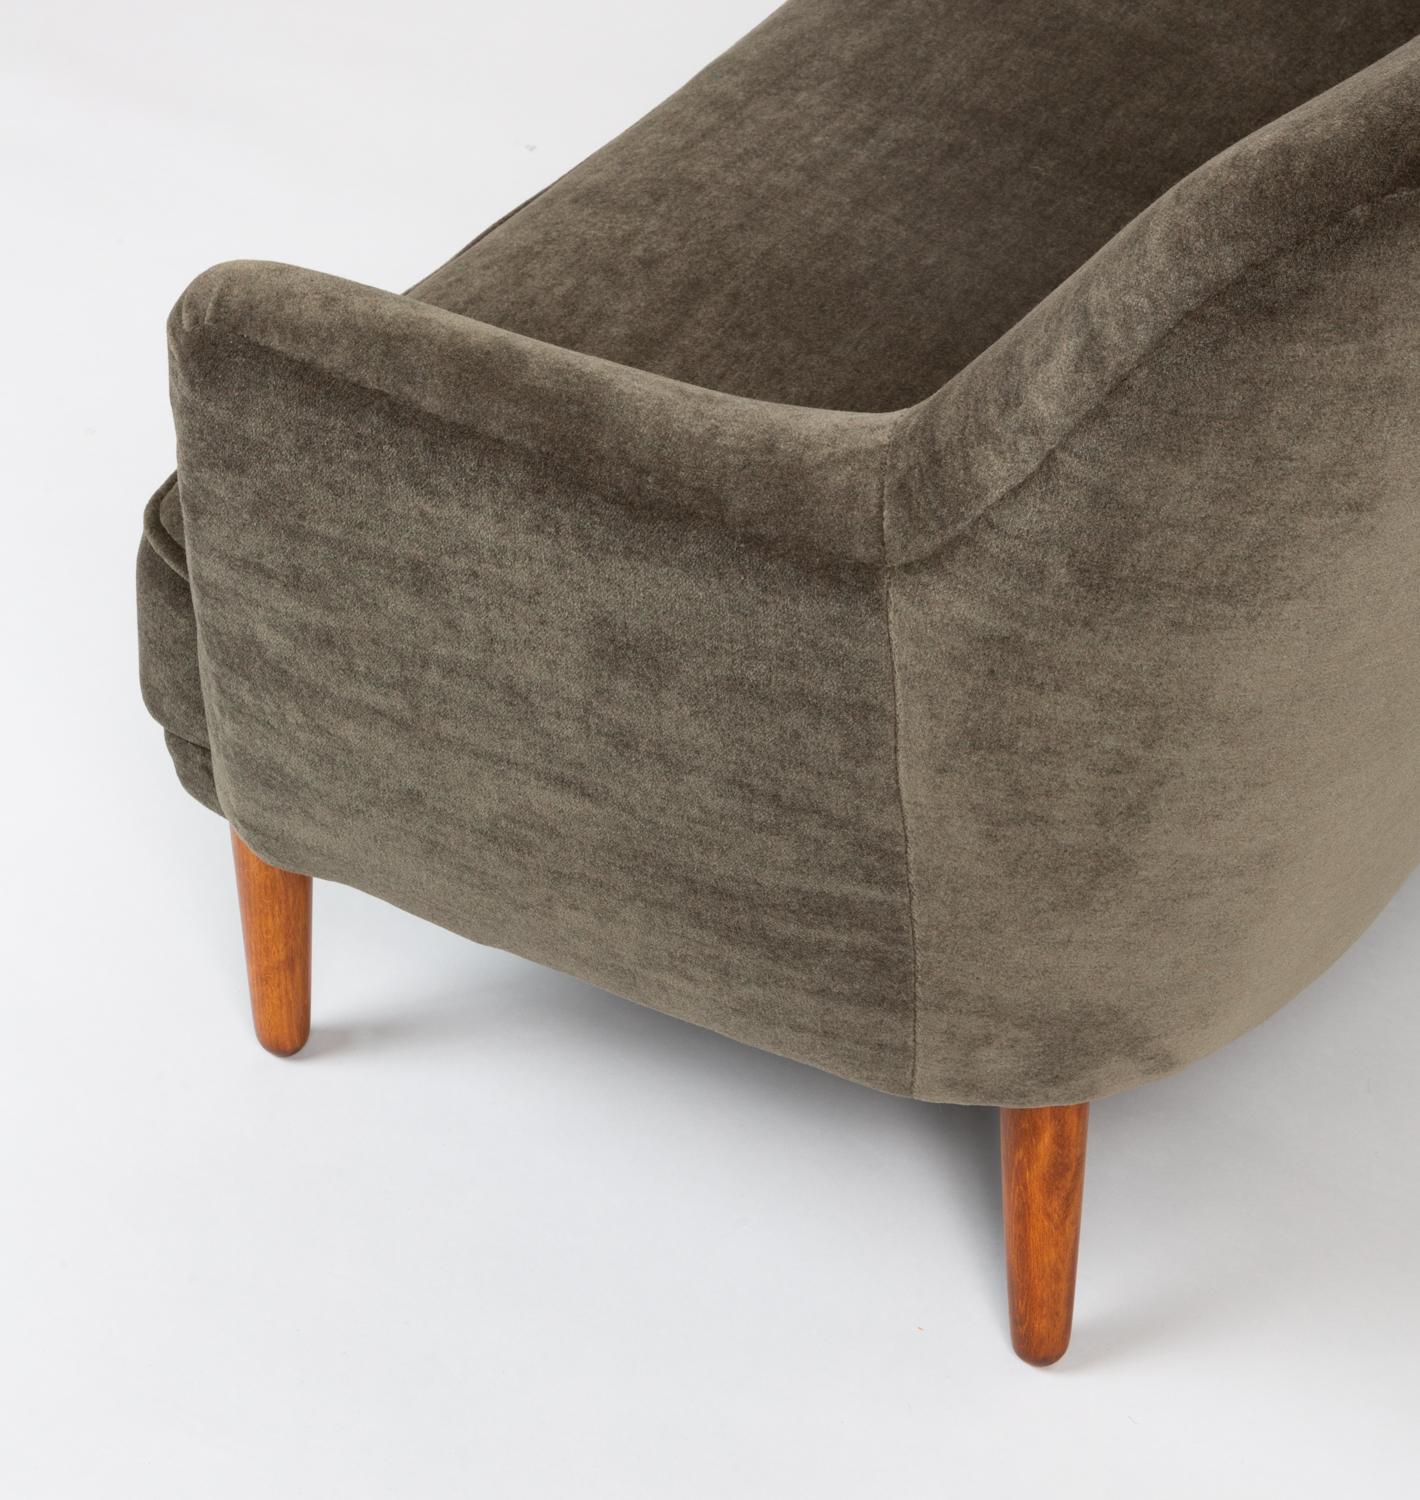 Small Danish Sofa or Settee by John Vedel Rieper for Anker Petersen 2